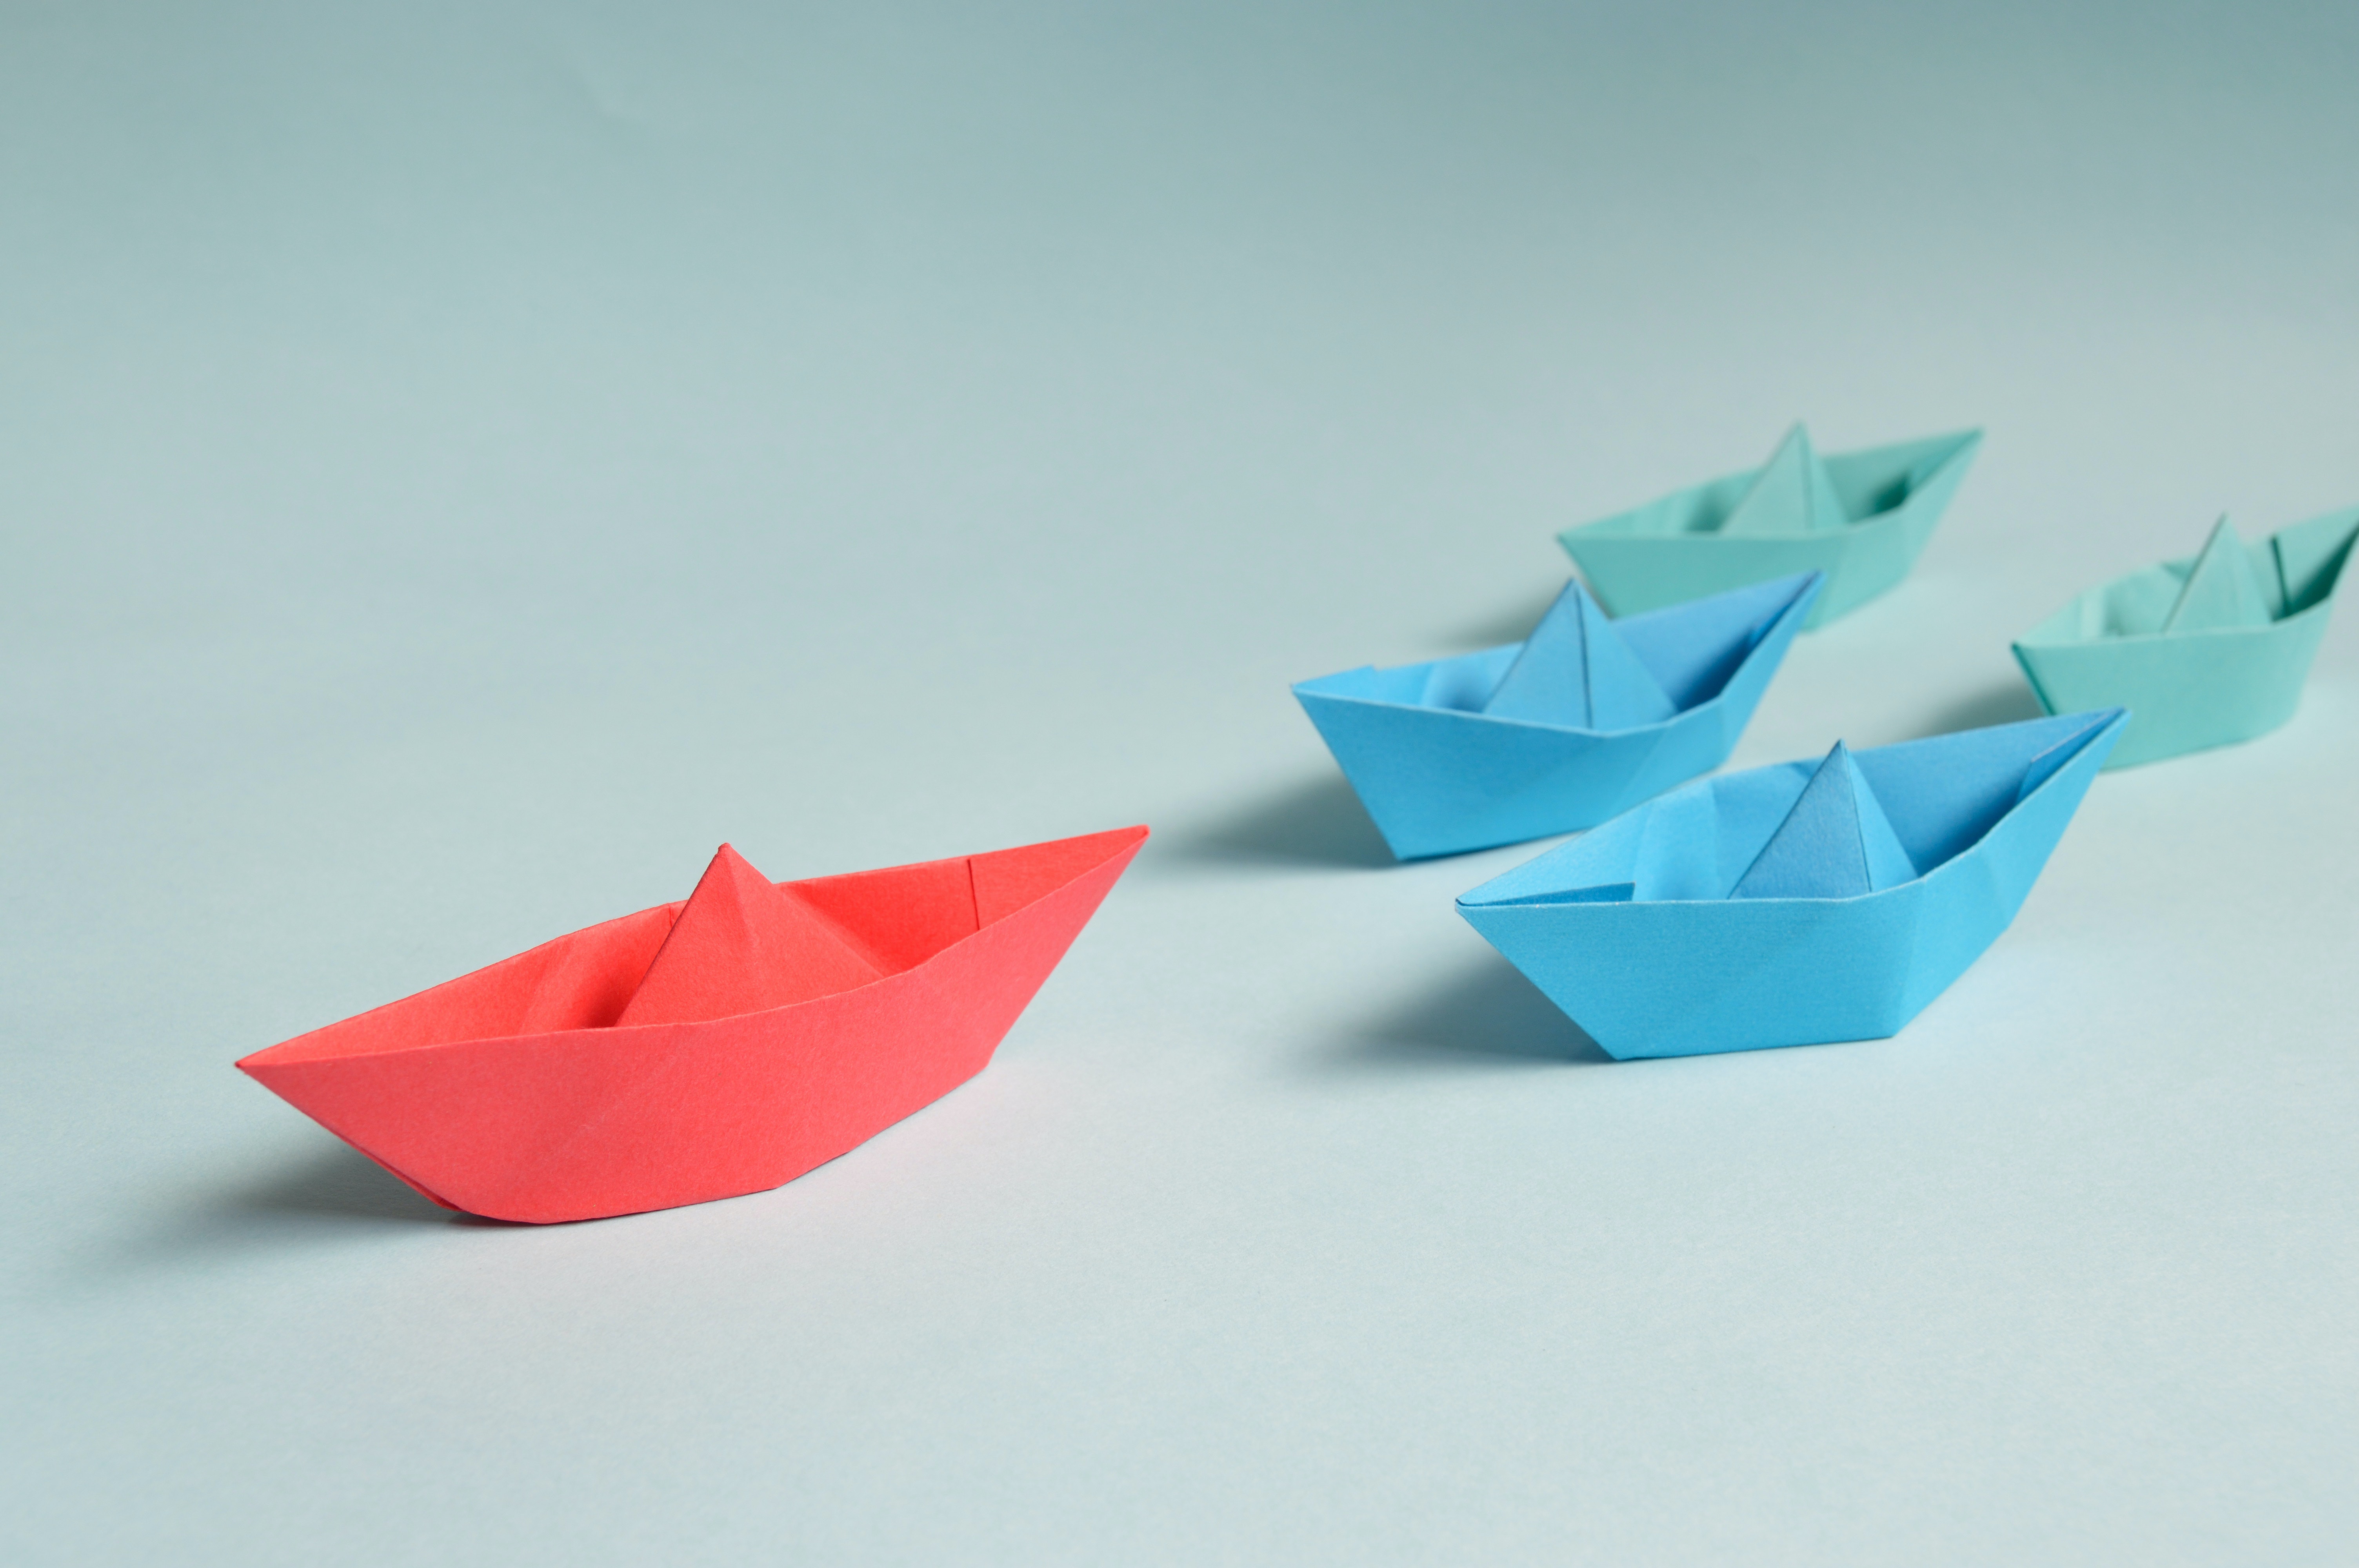 red origami boat, followed by two blue origami boats, and two light green origami boats